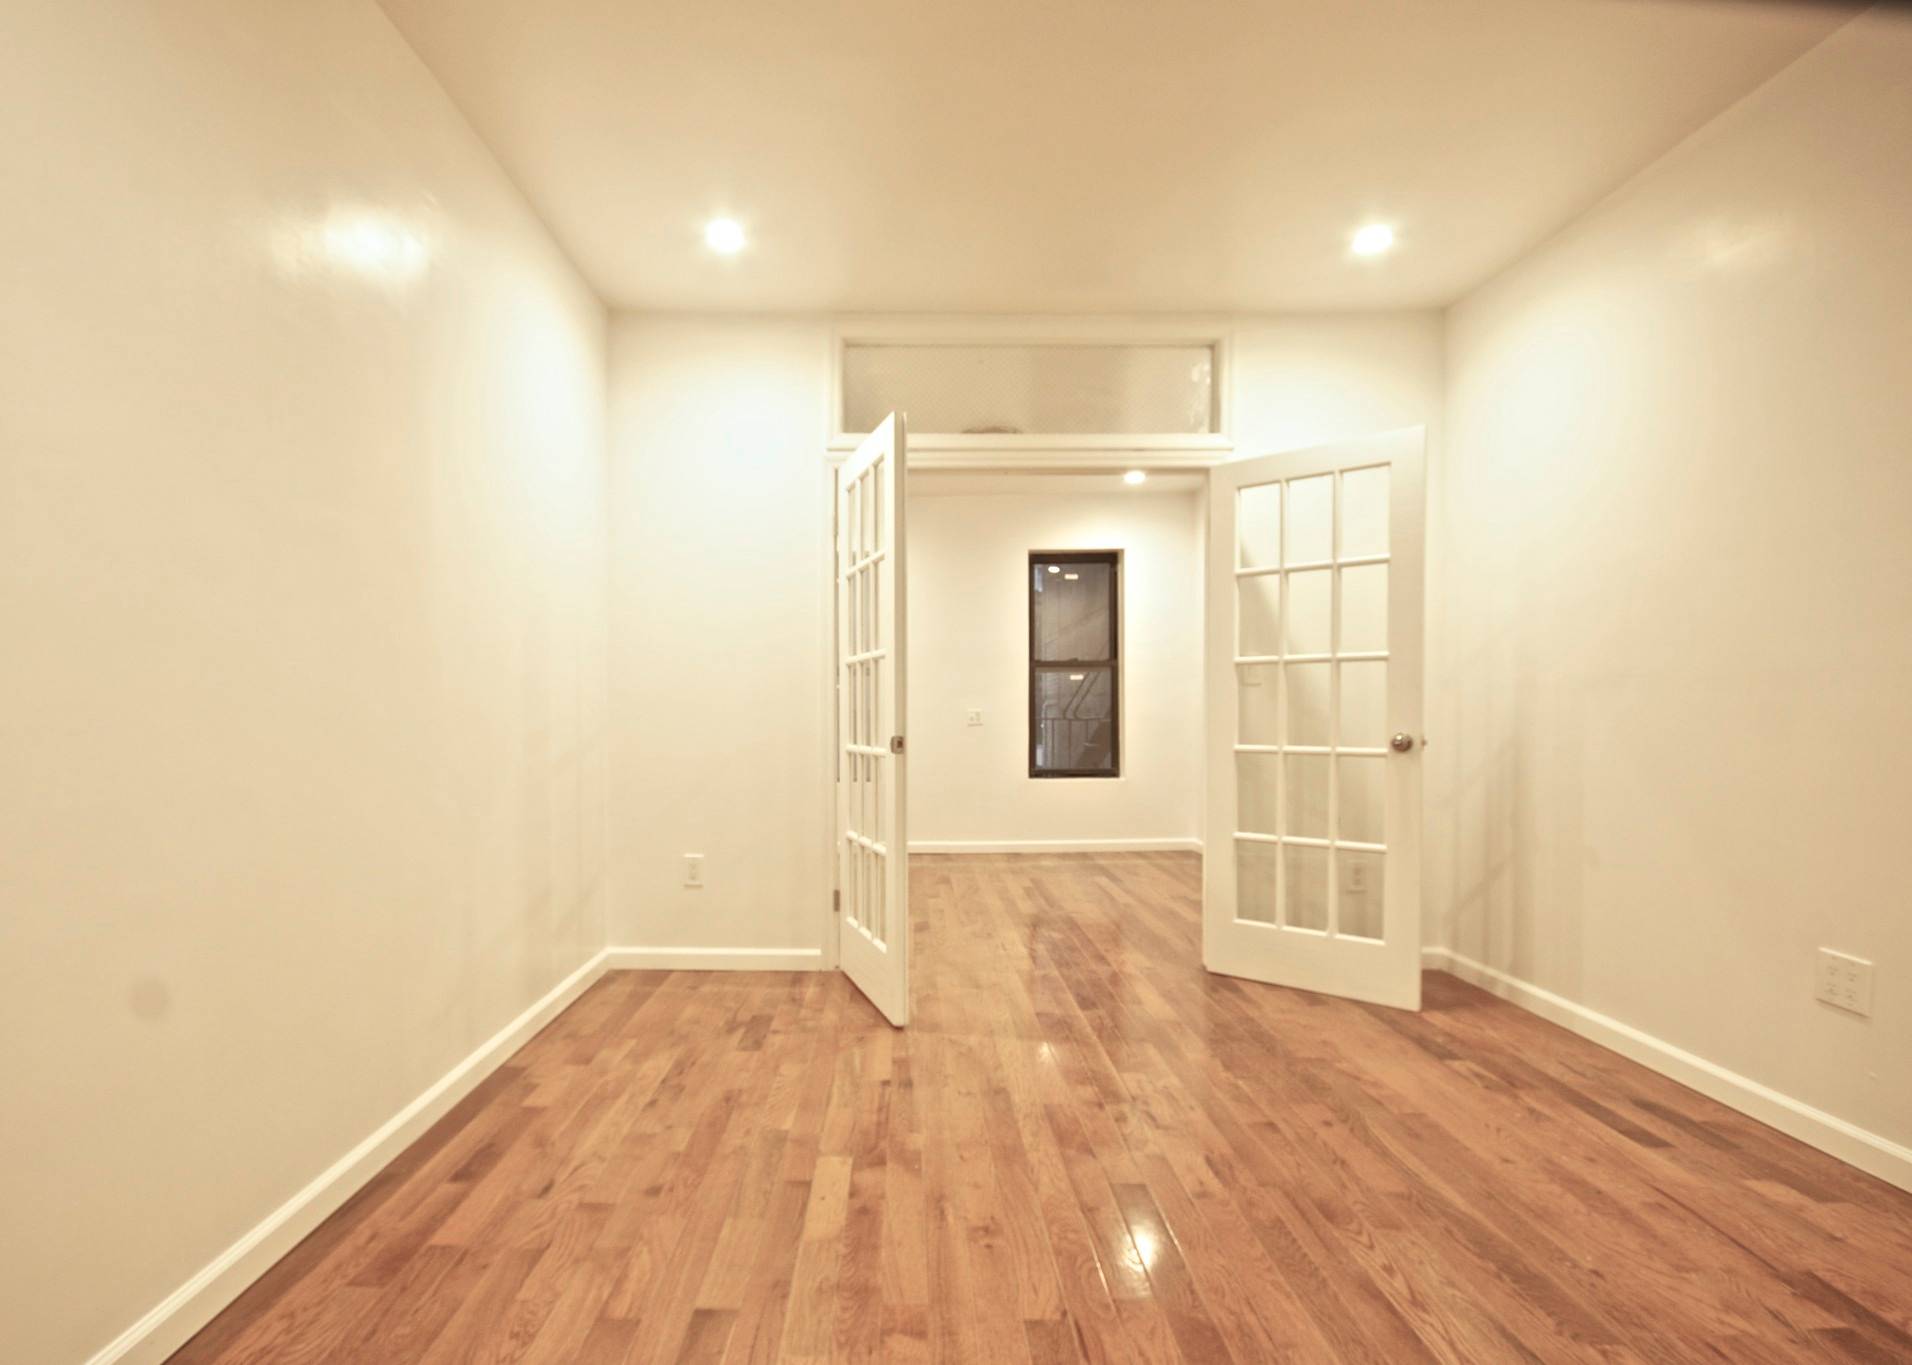 FULLY RENOVATED, RENT STABILIZED 1BR * JUST IN TIME FOR THE HOLIDAYS!